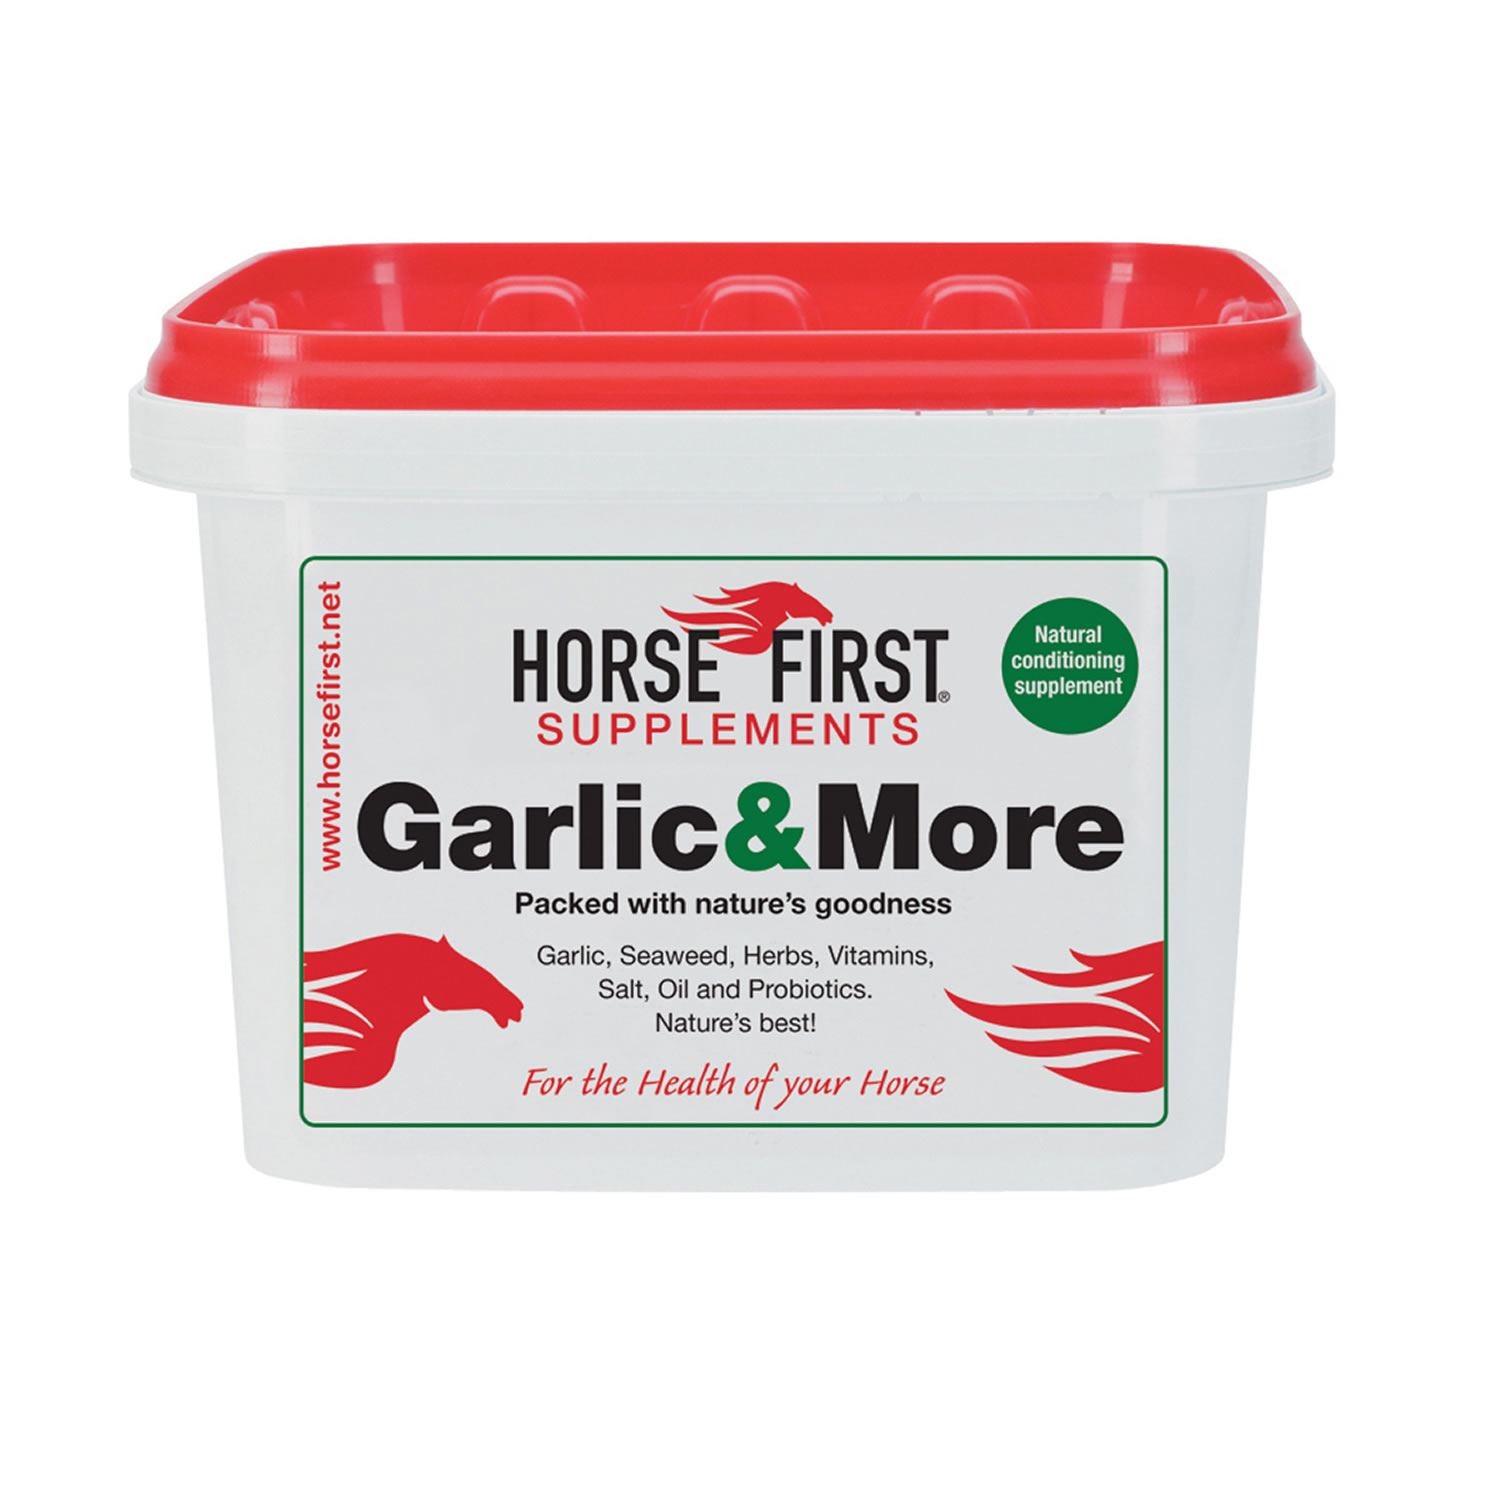 HORSE FIRST GARLIC & MORE - A blend of garlic, seaweed, herbs, oil, salt and vitamins for horses